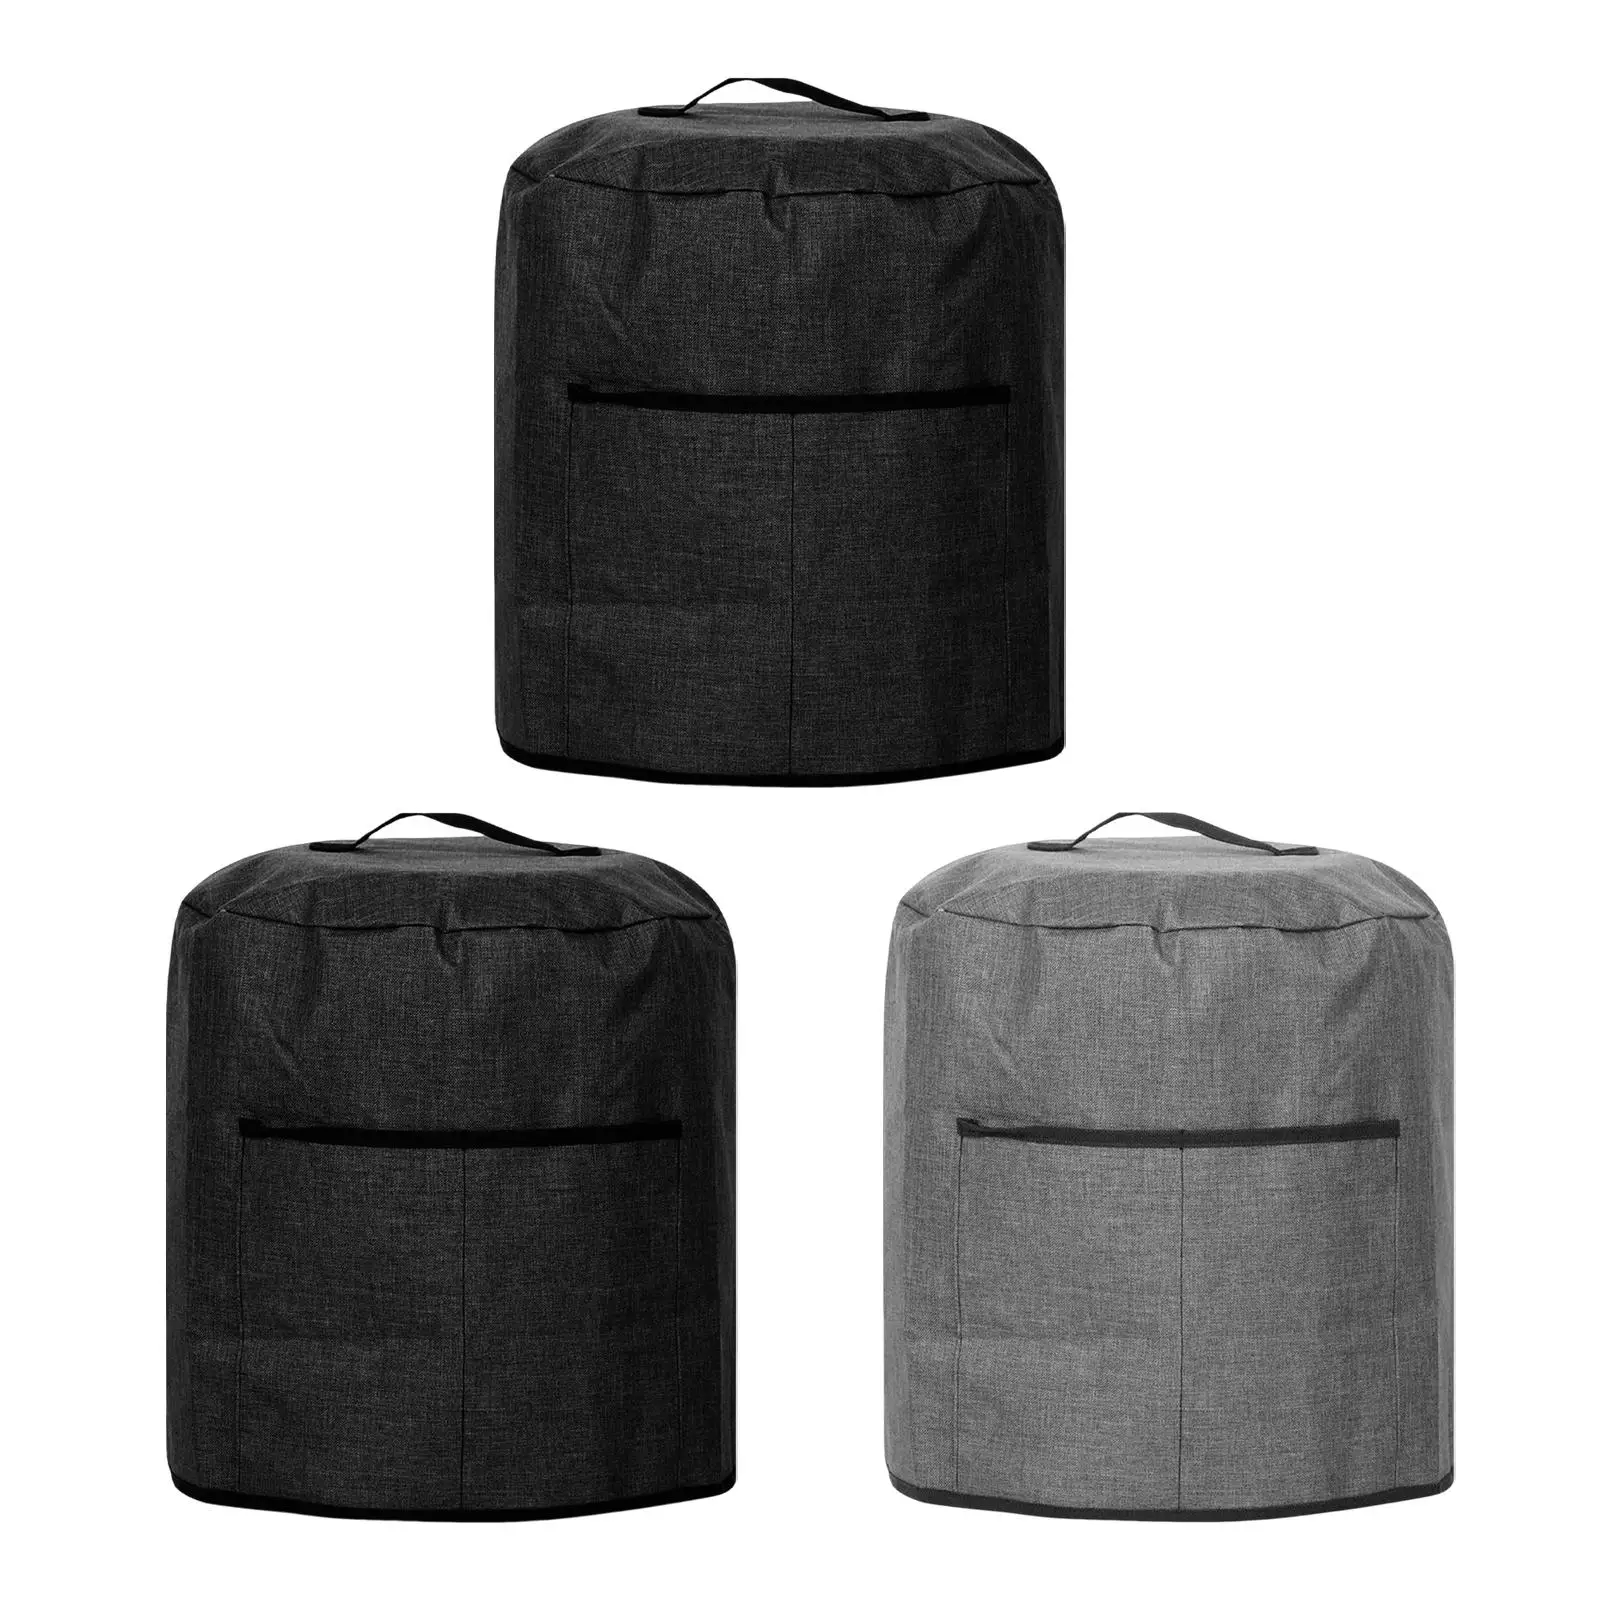 Air Fryer Dust Cover Multifunctional Reusable Oxford Cloth Thick Camping